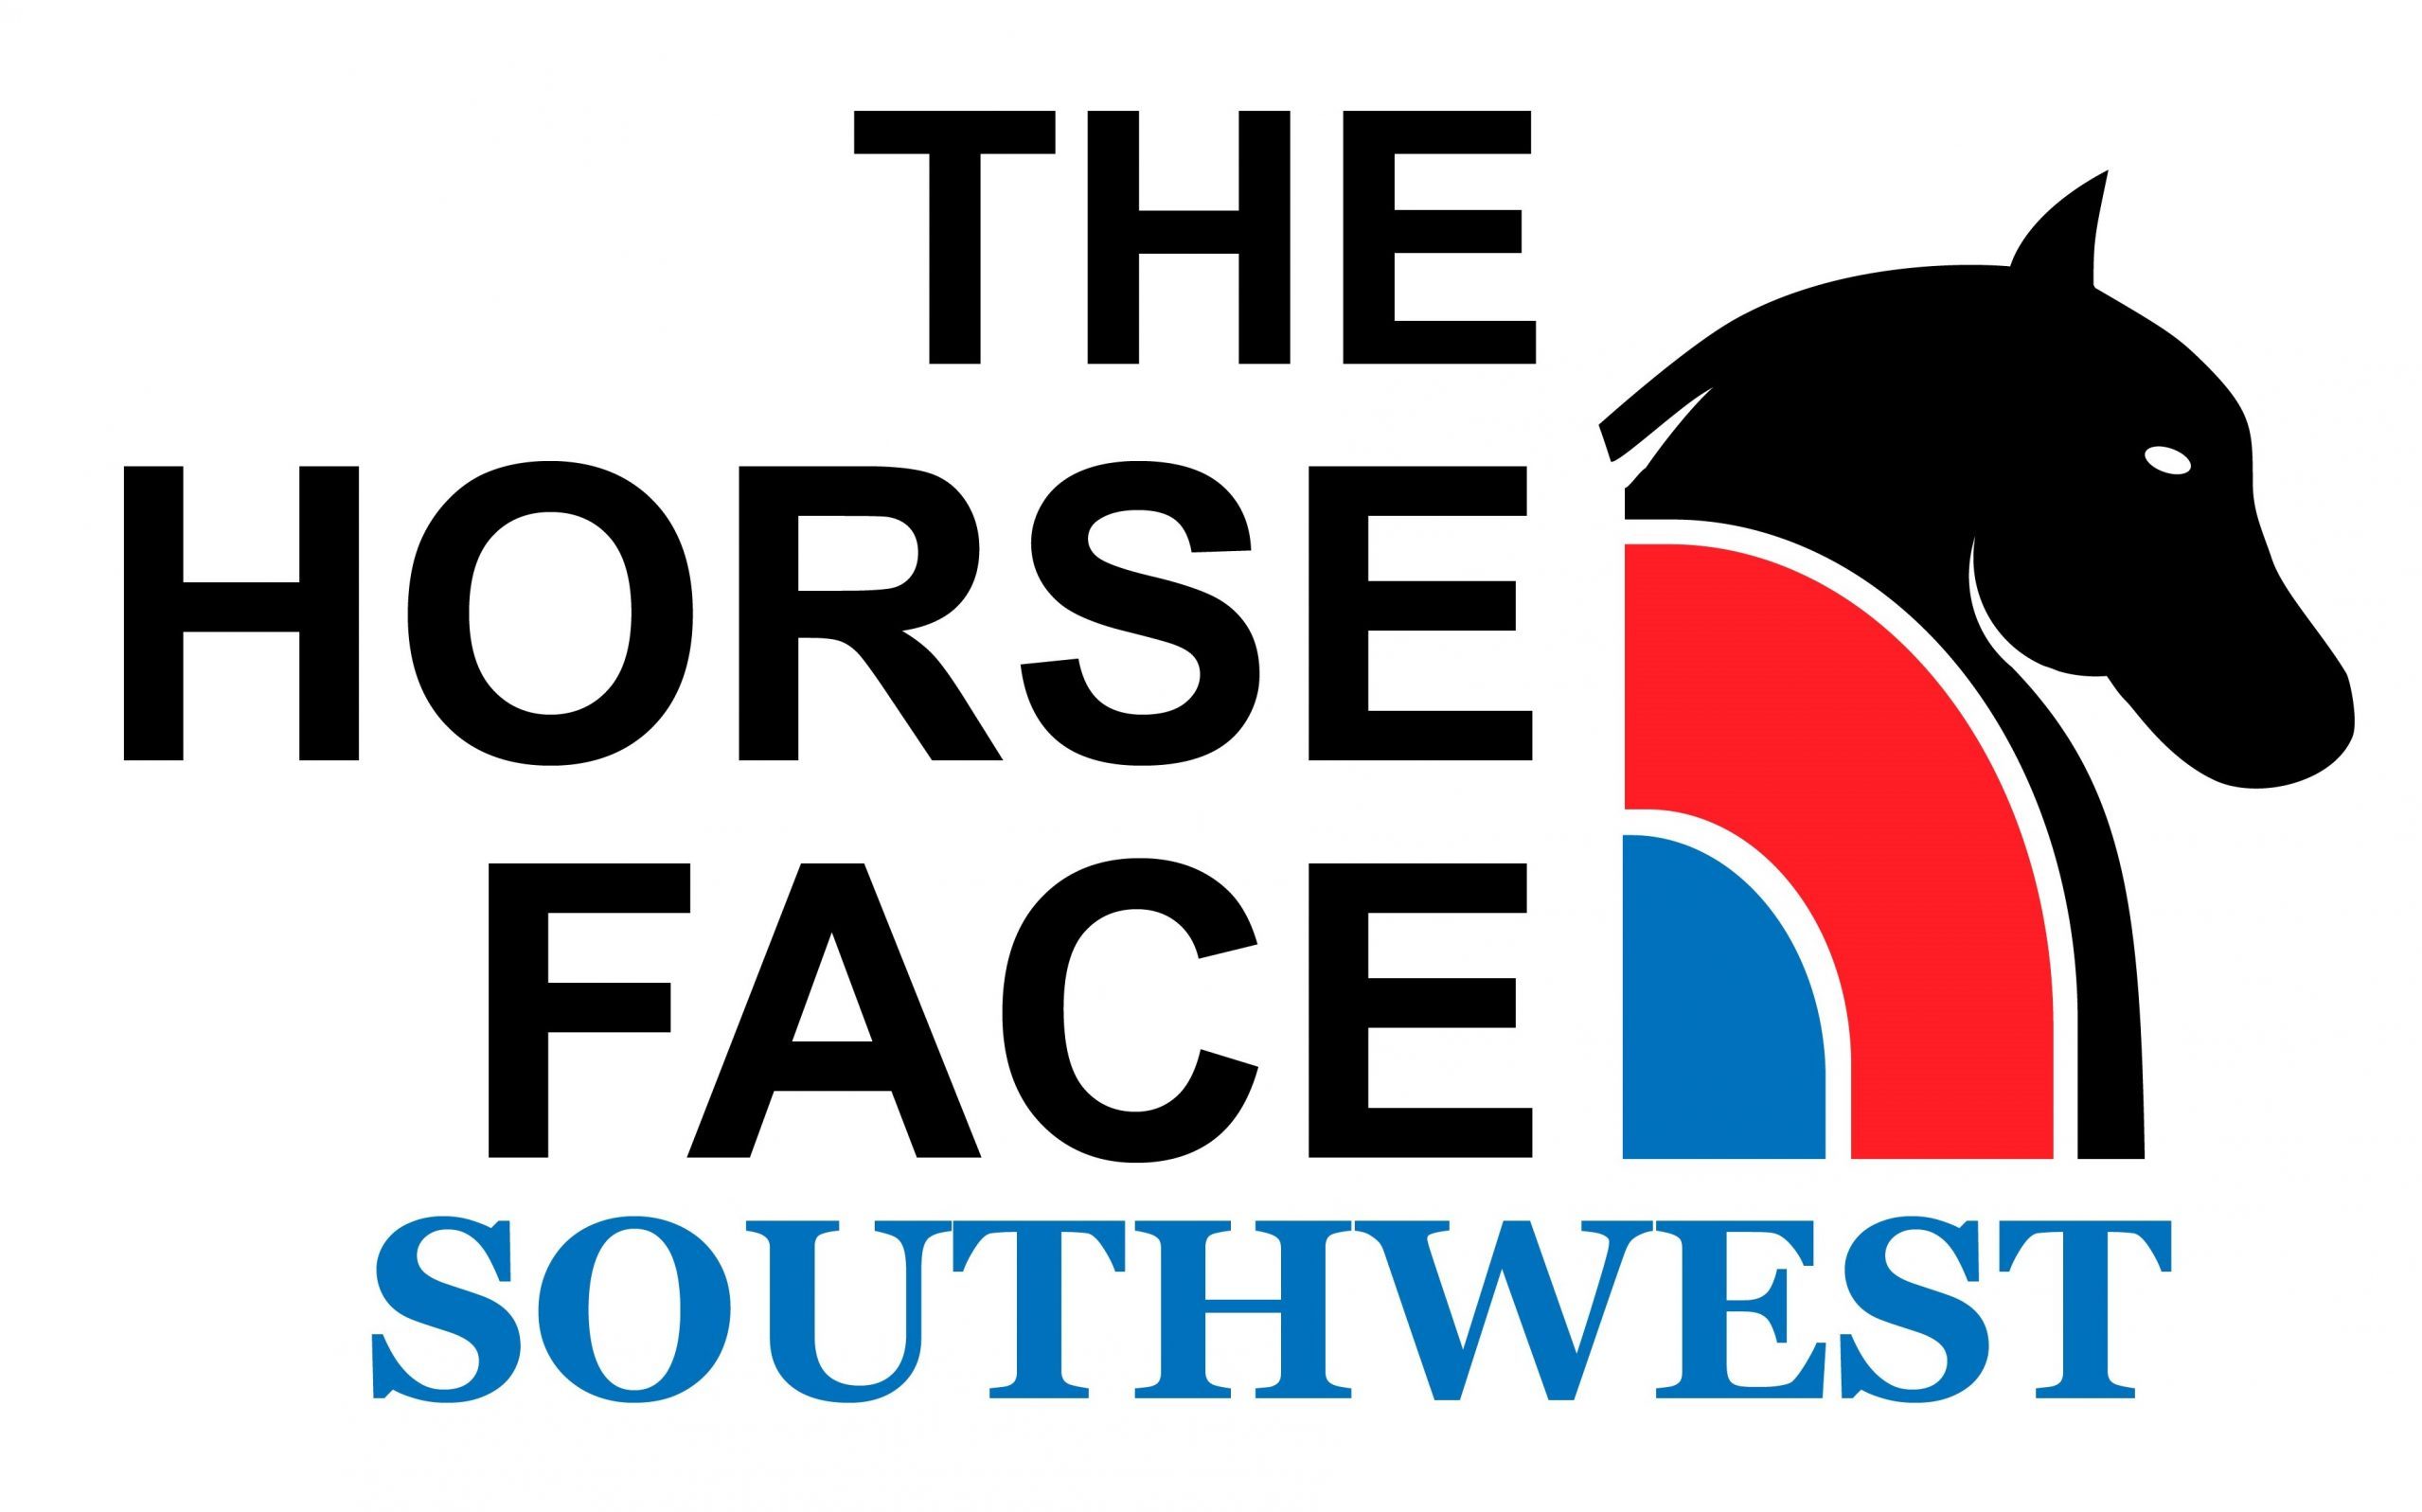 THE HORSE FACE